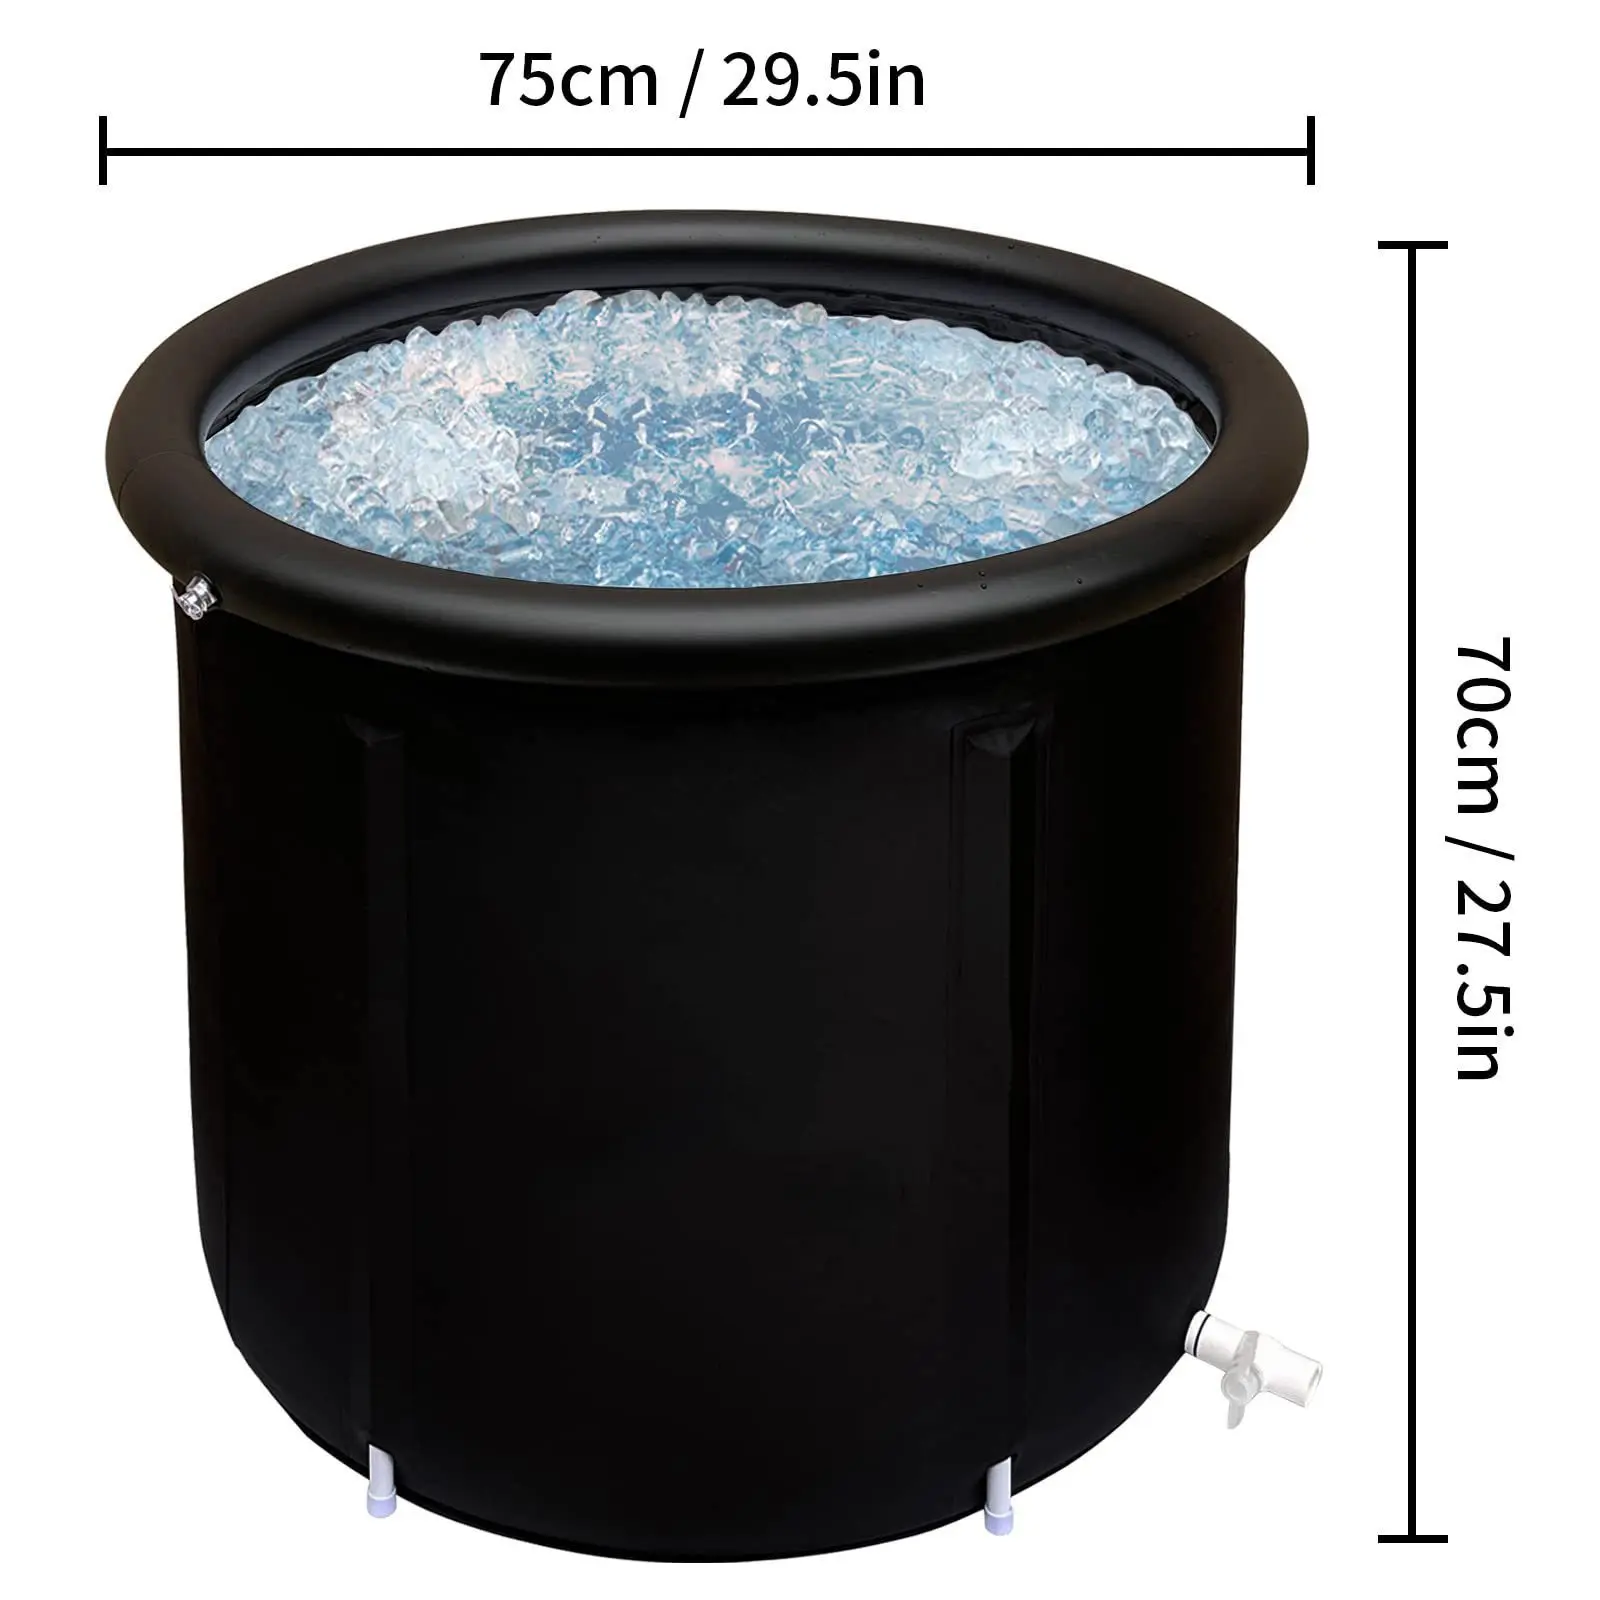 Outdoor ice bath spa bucket Thickened folding bathtub cold plunge tub inflable for garden